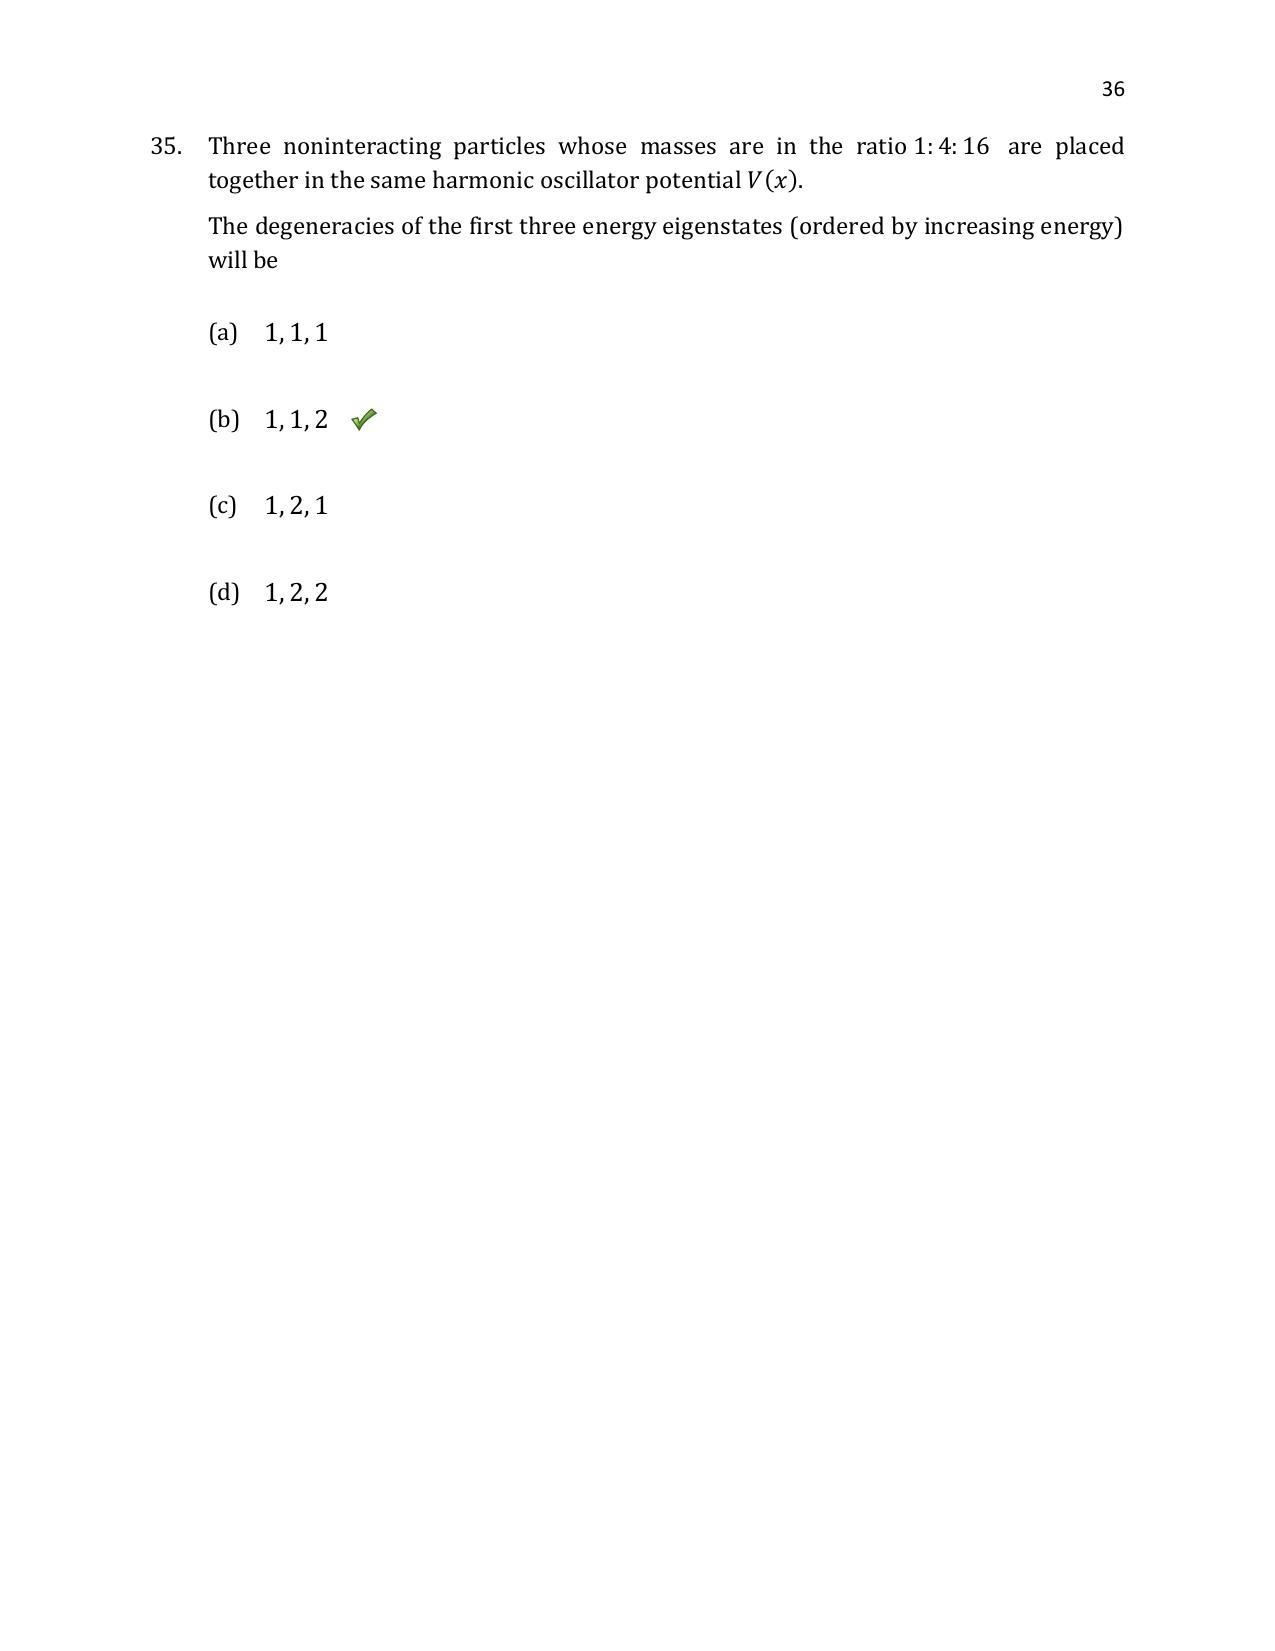 TIFR GS 2020 Physics Question Paper - Page 37